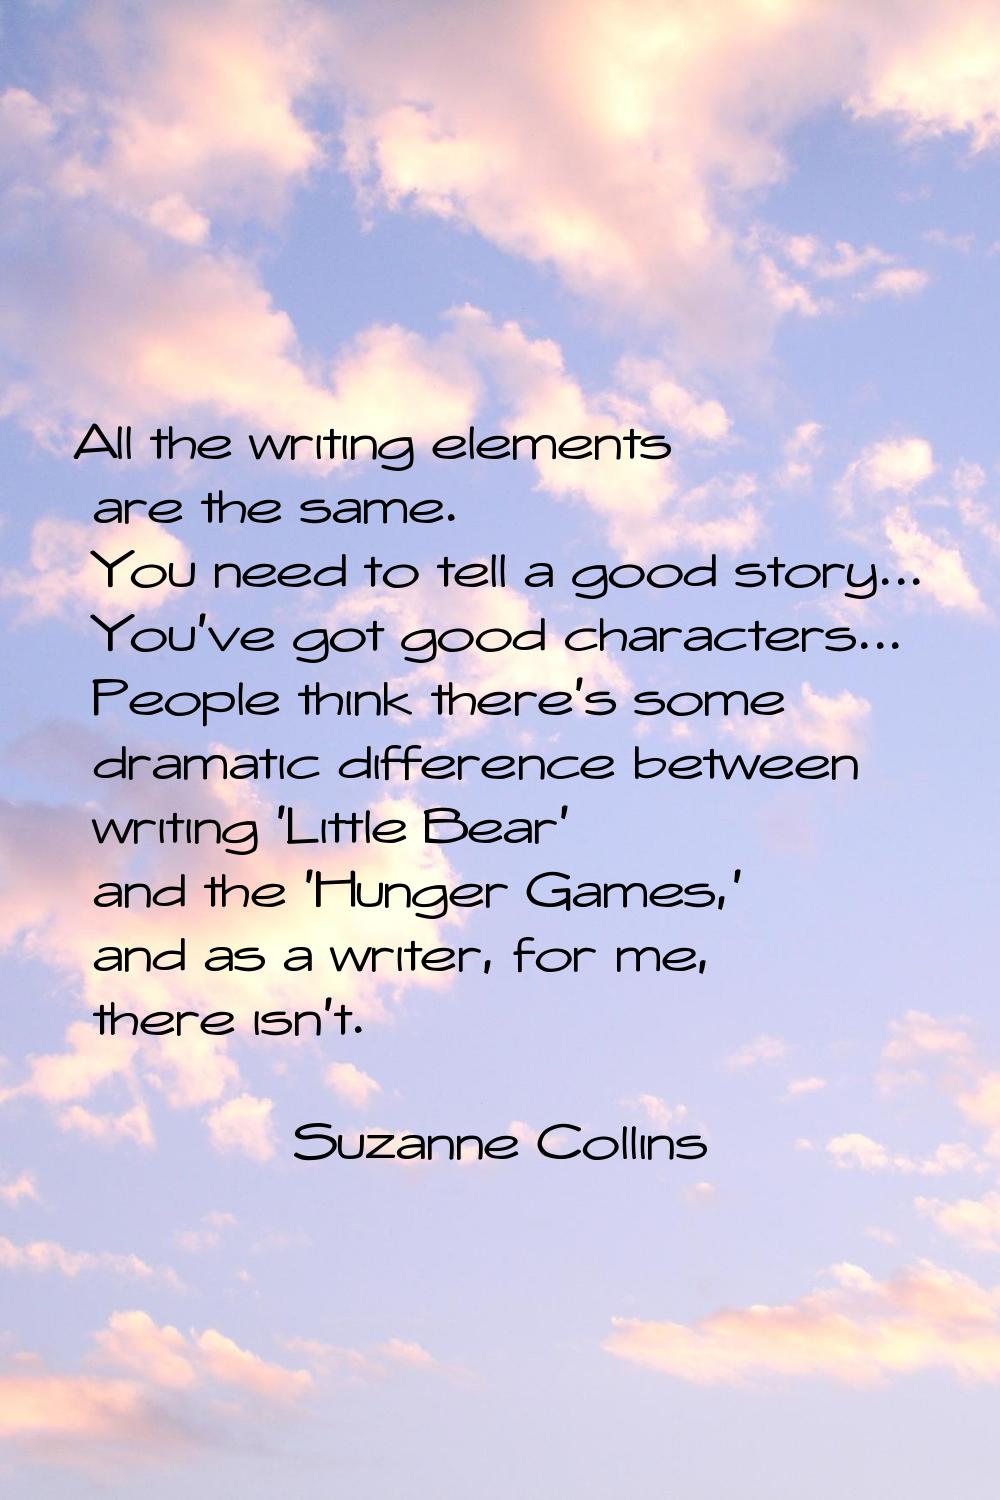 All the writing elements are the same. You need to tell a good story... You've got good characters.